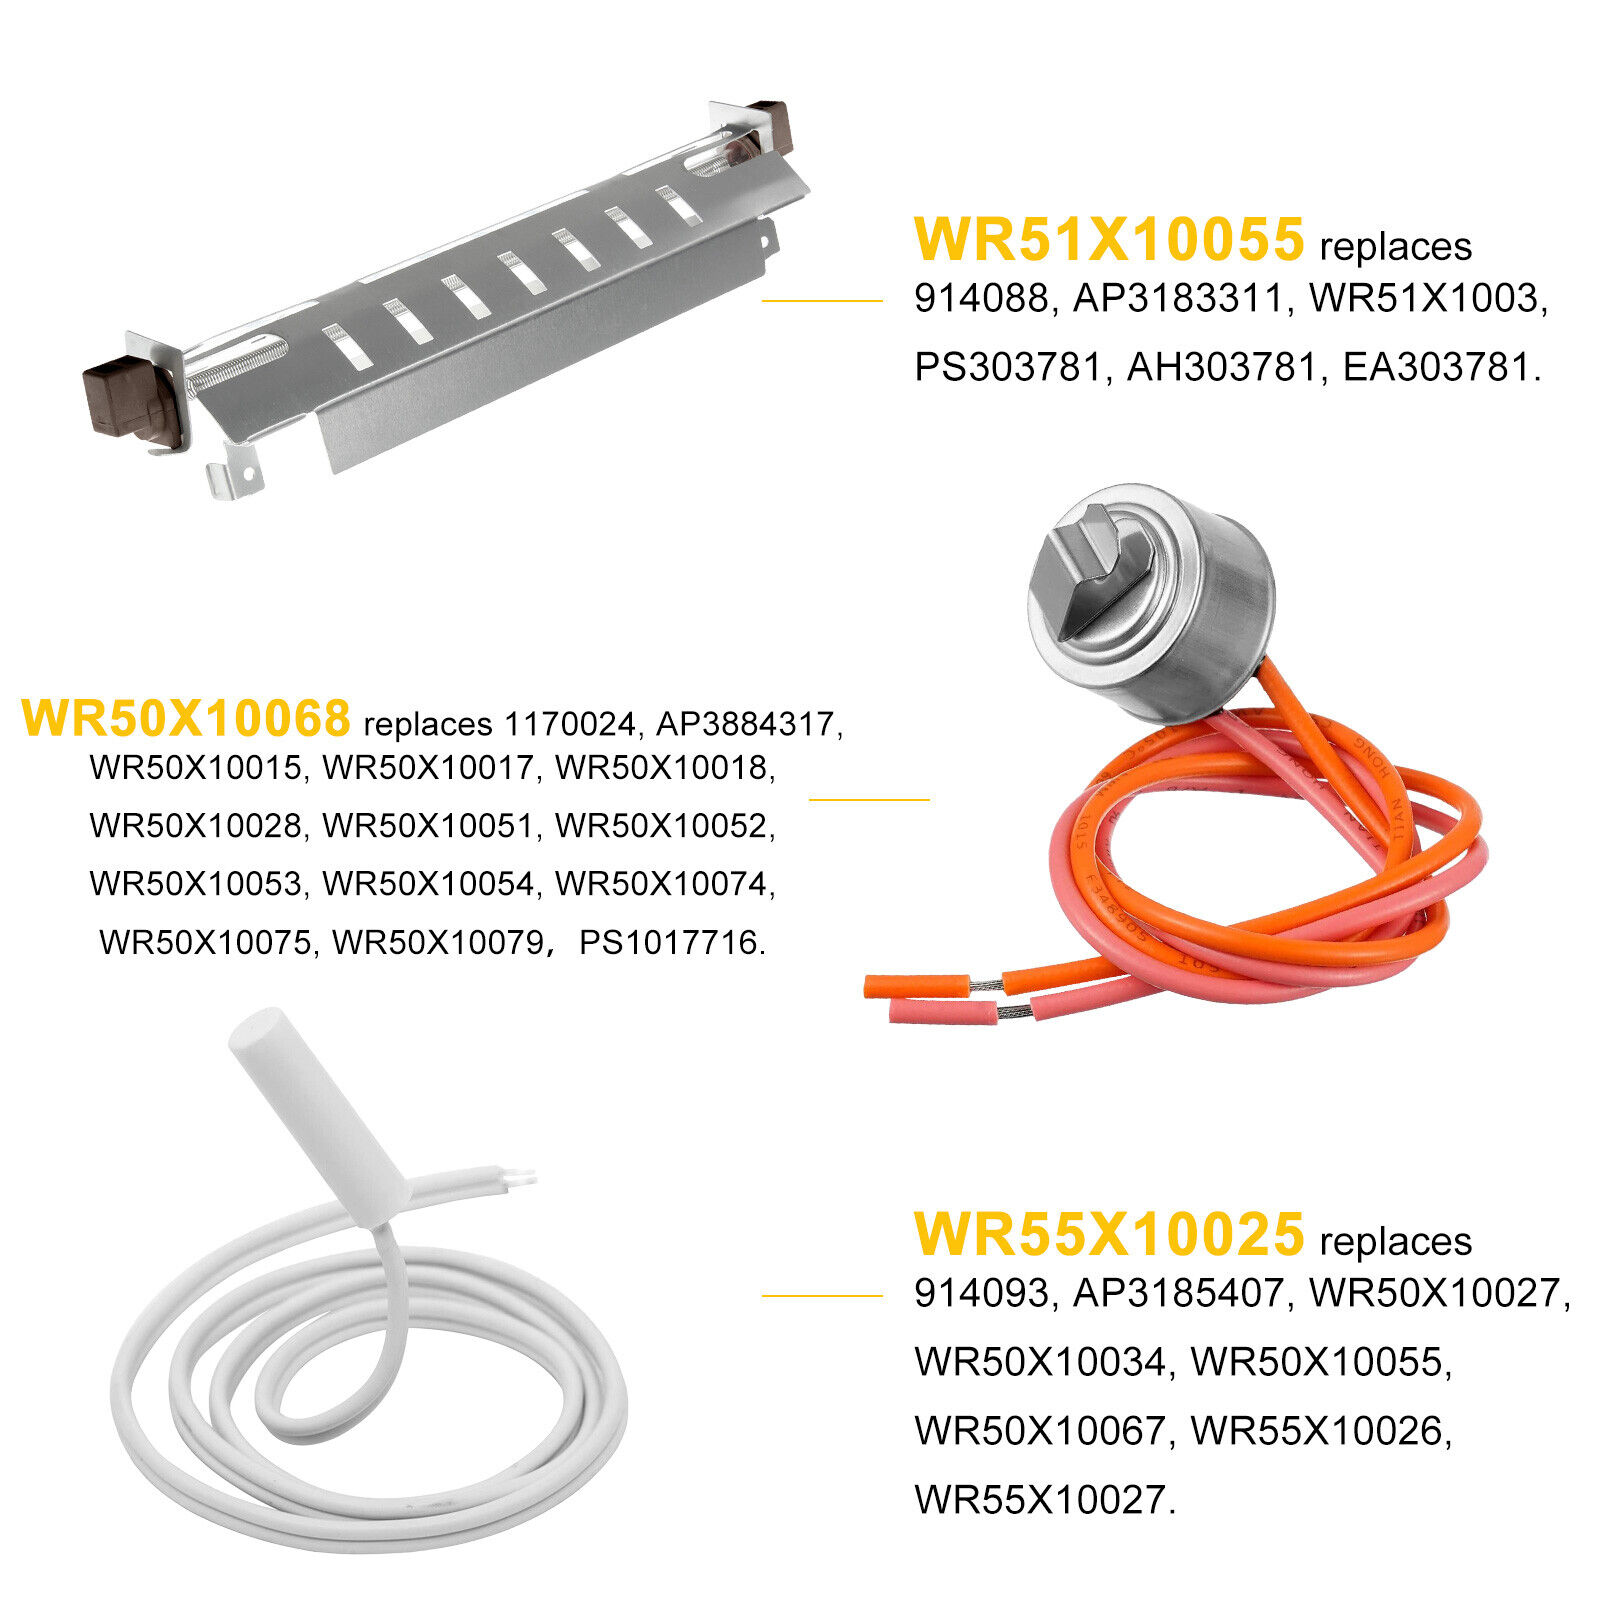 thinkstar Wr51X10055 Refrigerator Defrost Heater Wr51X1003 Ap3183311 Replacement For Ge Us